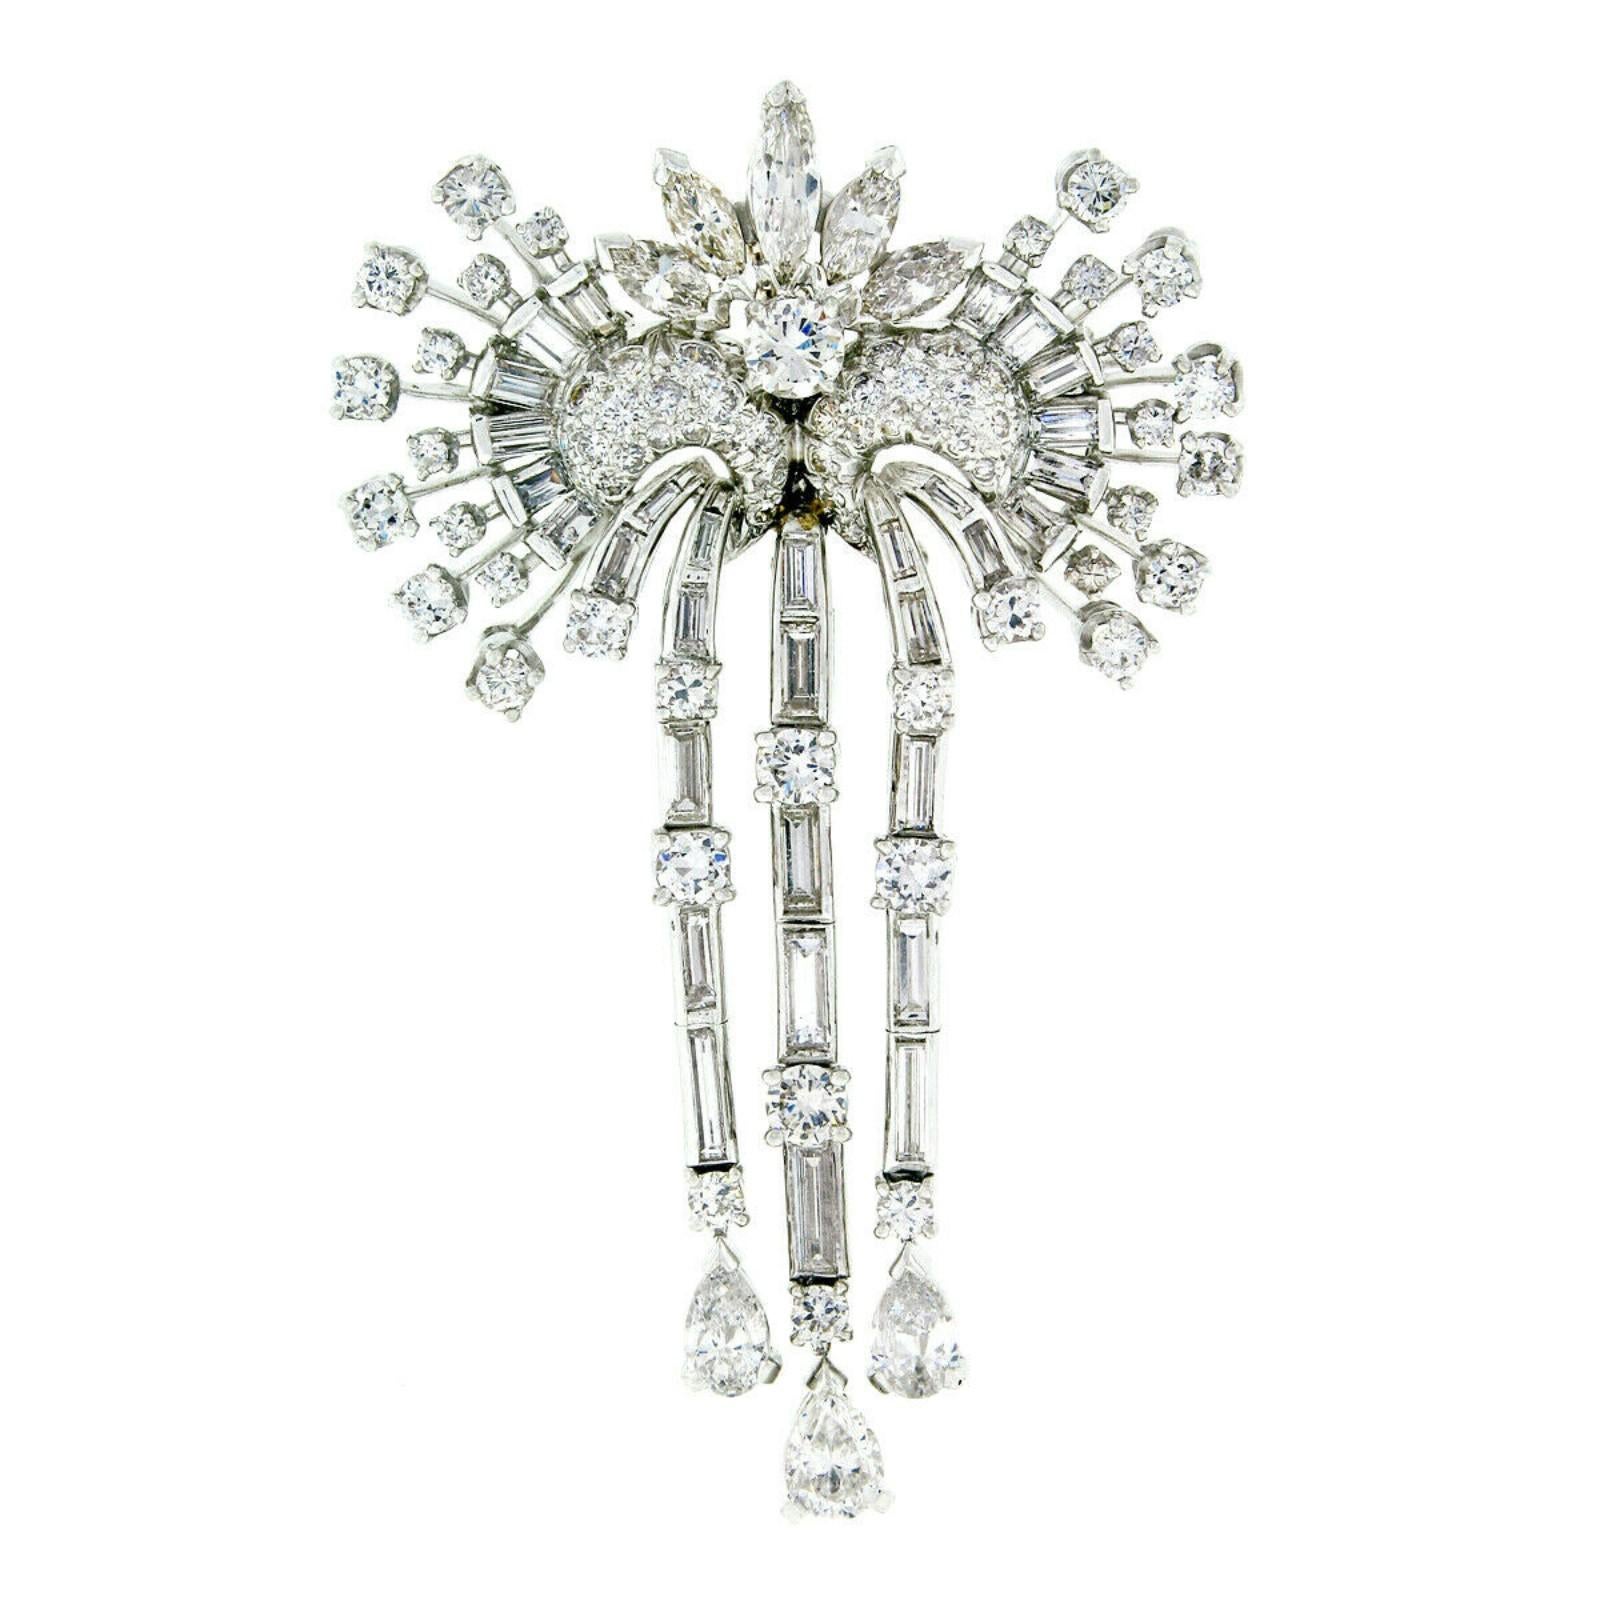 This magnificent diamond brooch pendant was crafted from solid platinum during the mid-century and features approximately 10.45 carats of very fine quality diamonds. The pendant has a look similar to that of ornate masquerade or mardi gras masks.